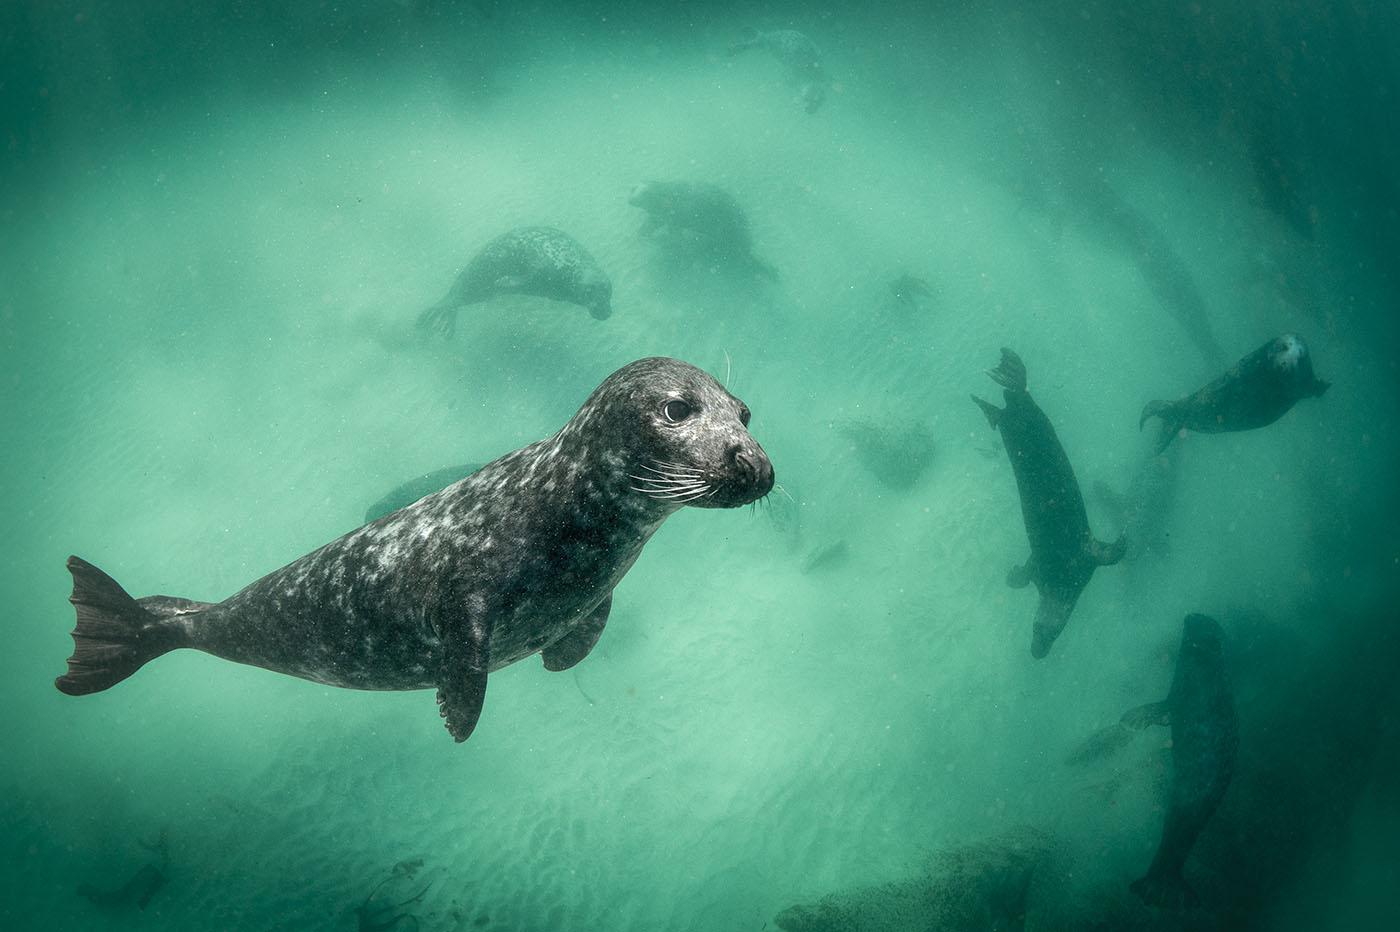 A grey seal amongst its compatriots. Photo: George Karbus